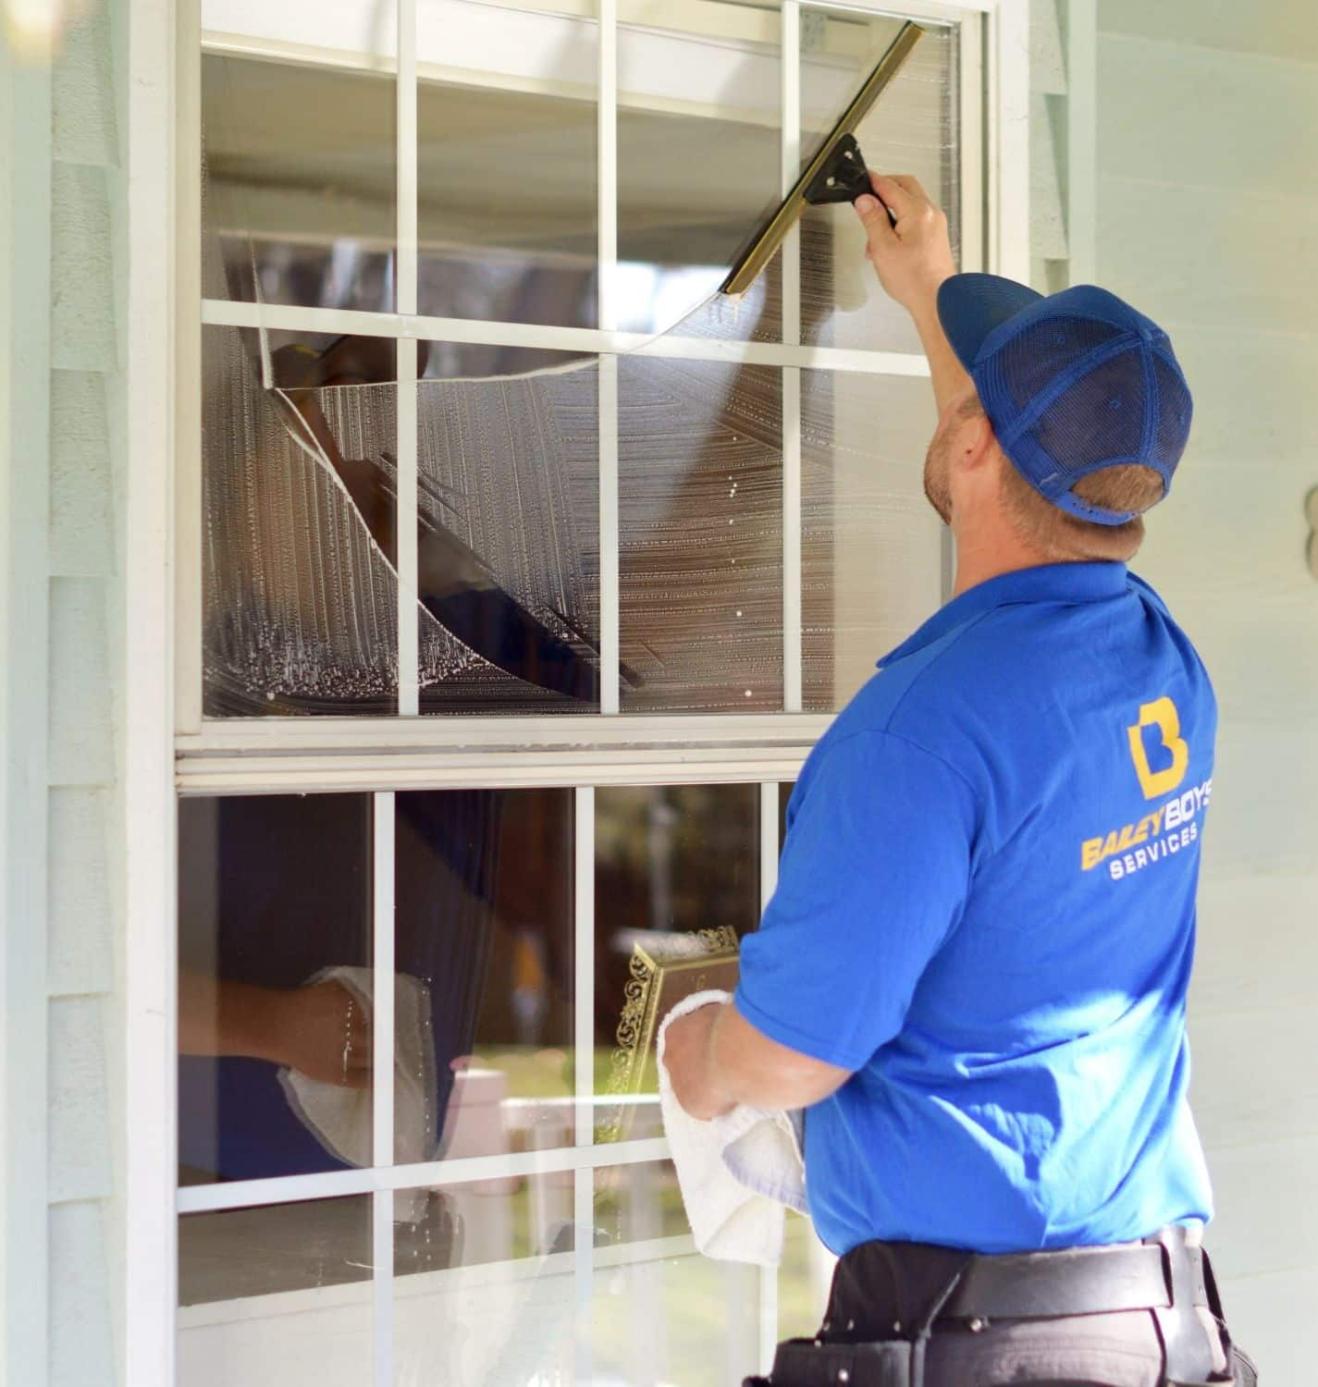 How Can Dentists Find the Right Window Cleaning Company for Their Practice?